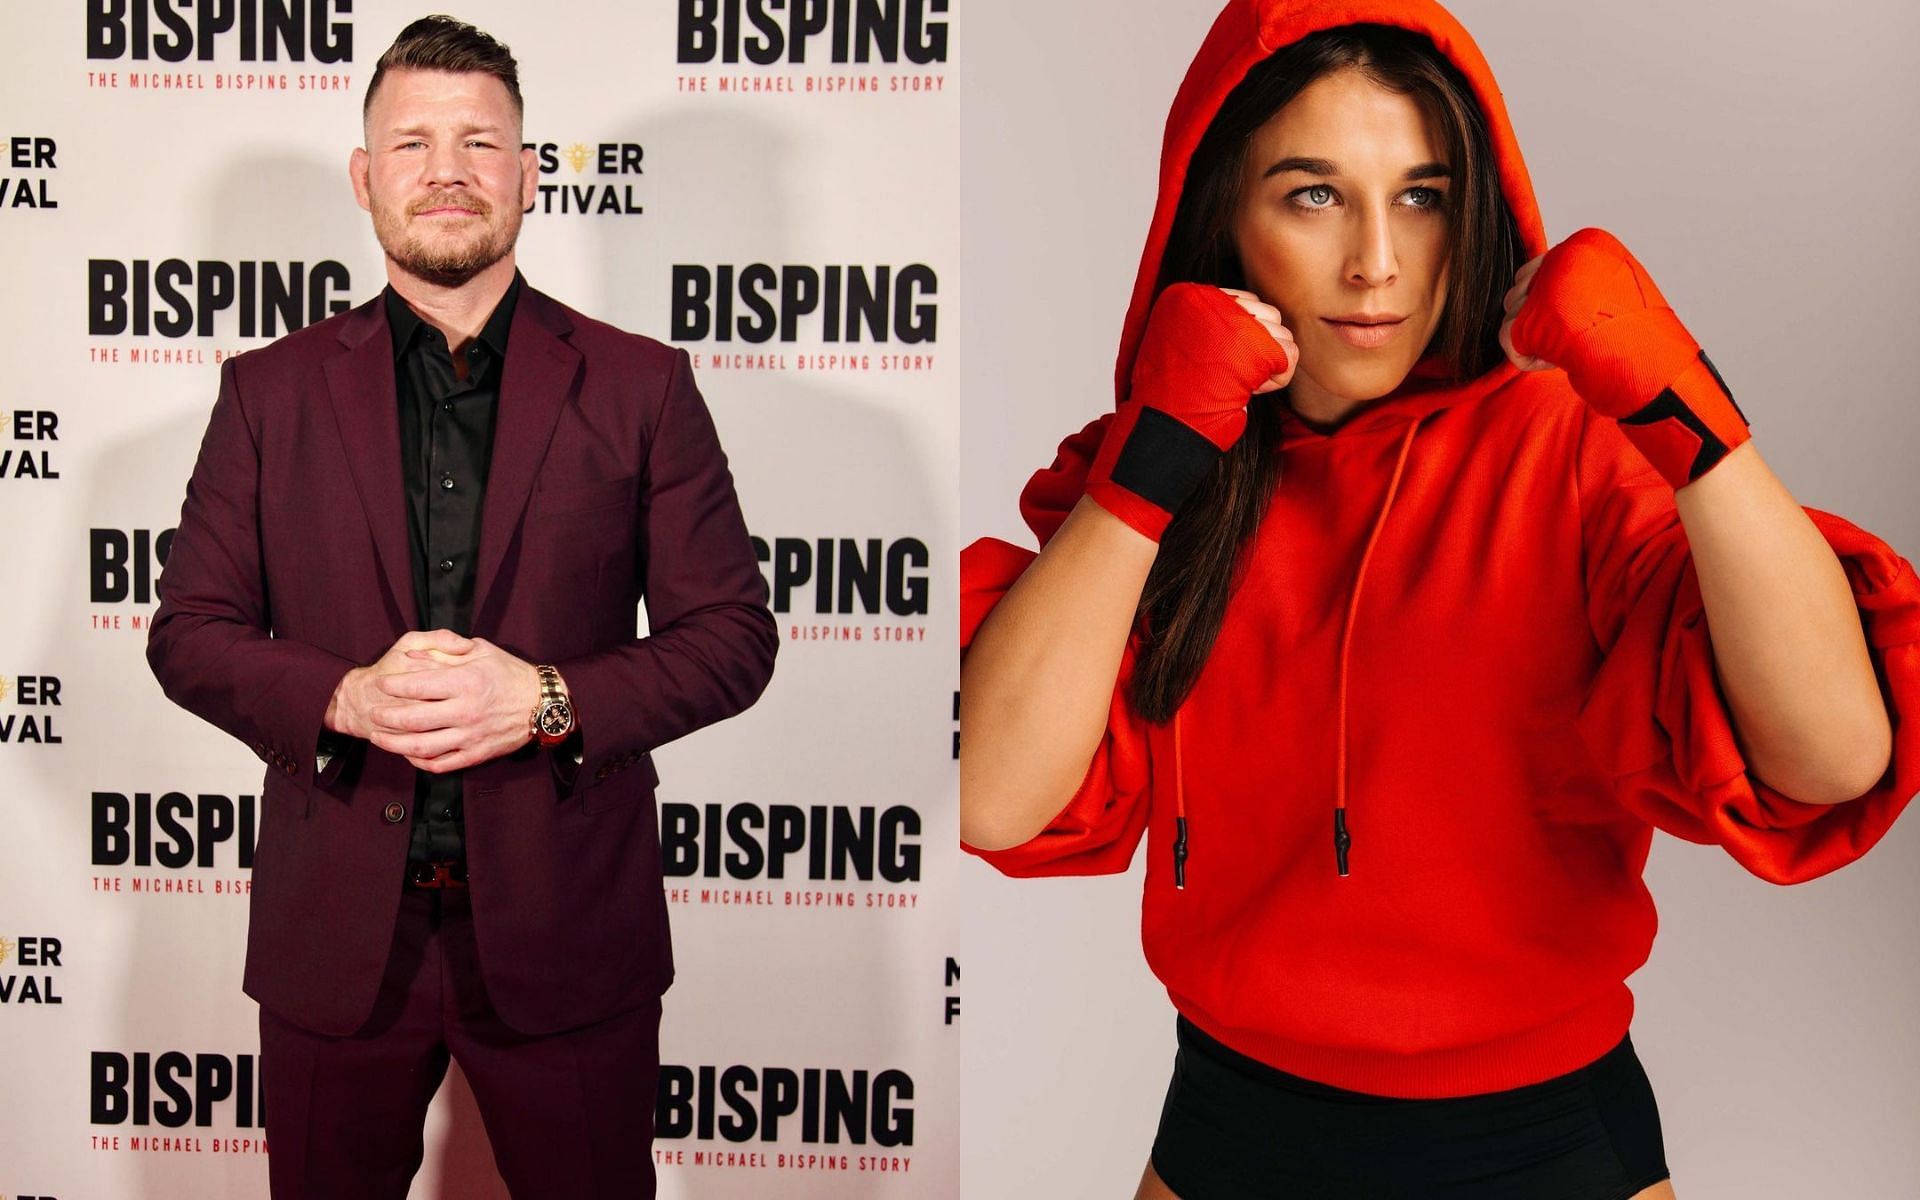 Michael Bisping (left), Joanna Jedrzejczyk (right) [Images courtesy: @mikebisping and @joannajedrzejczyk via Instagram]